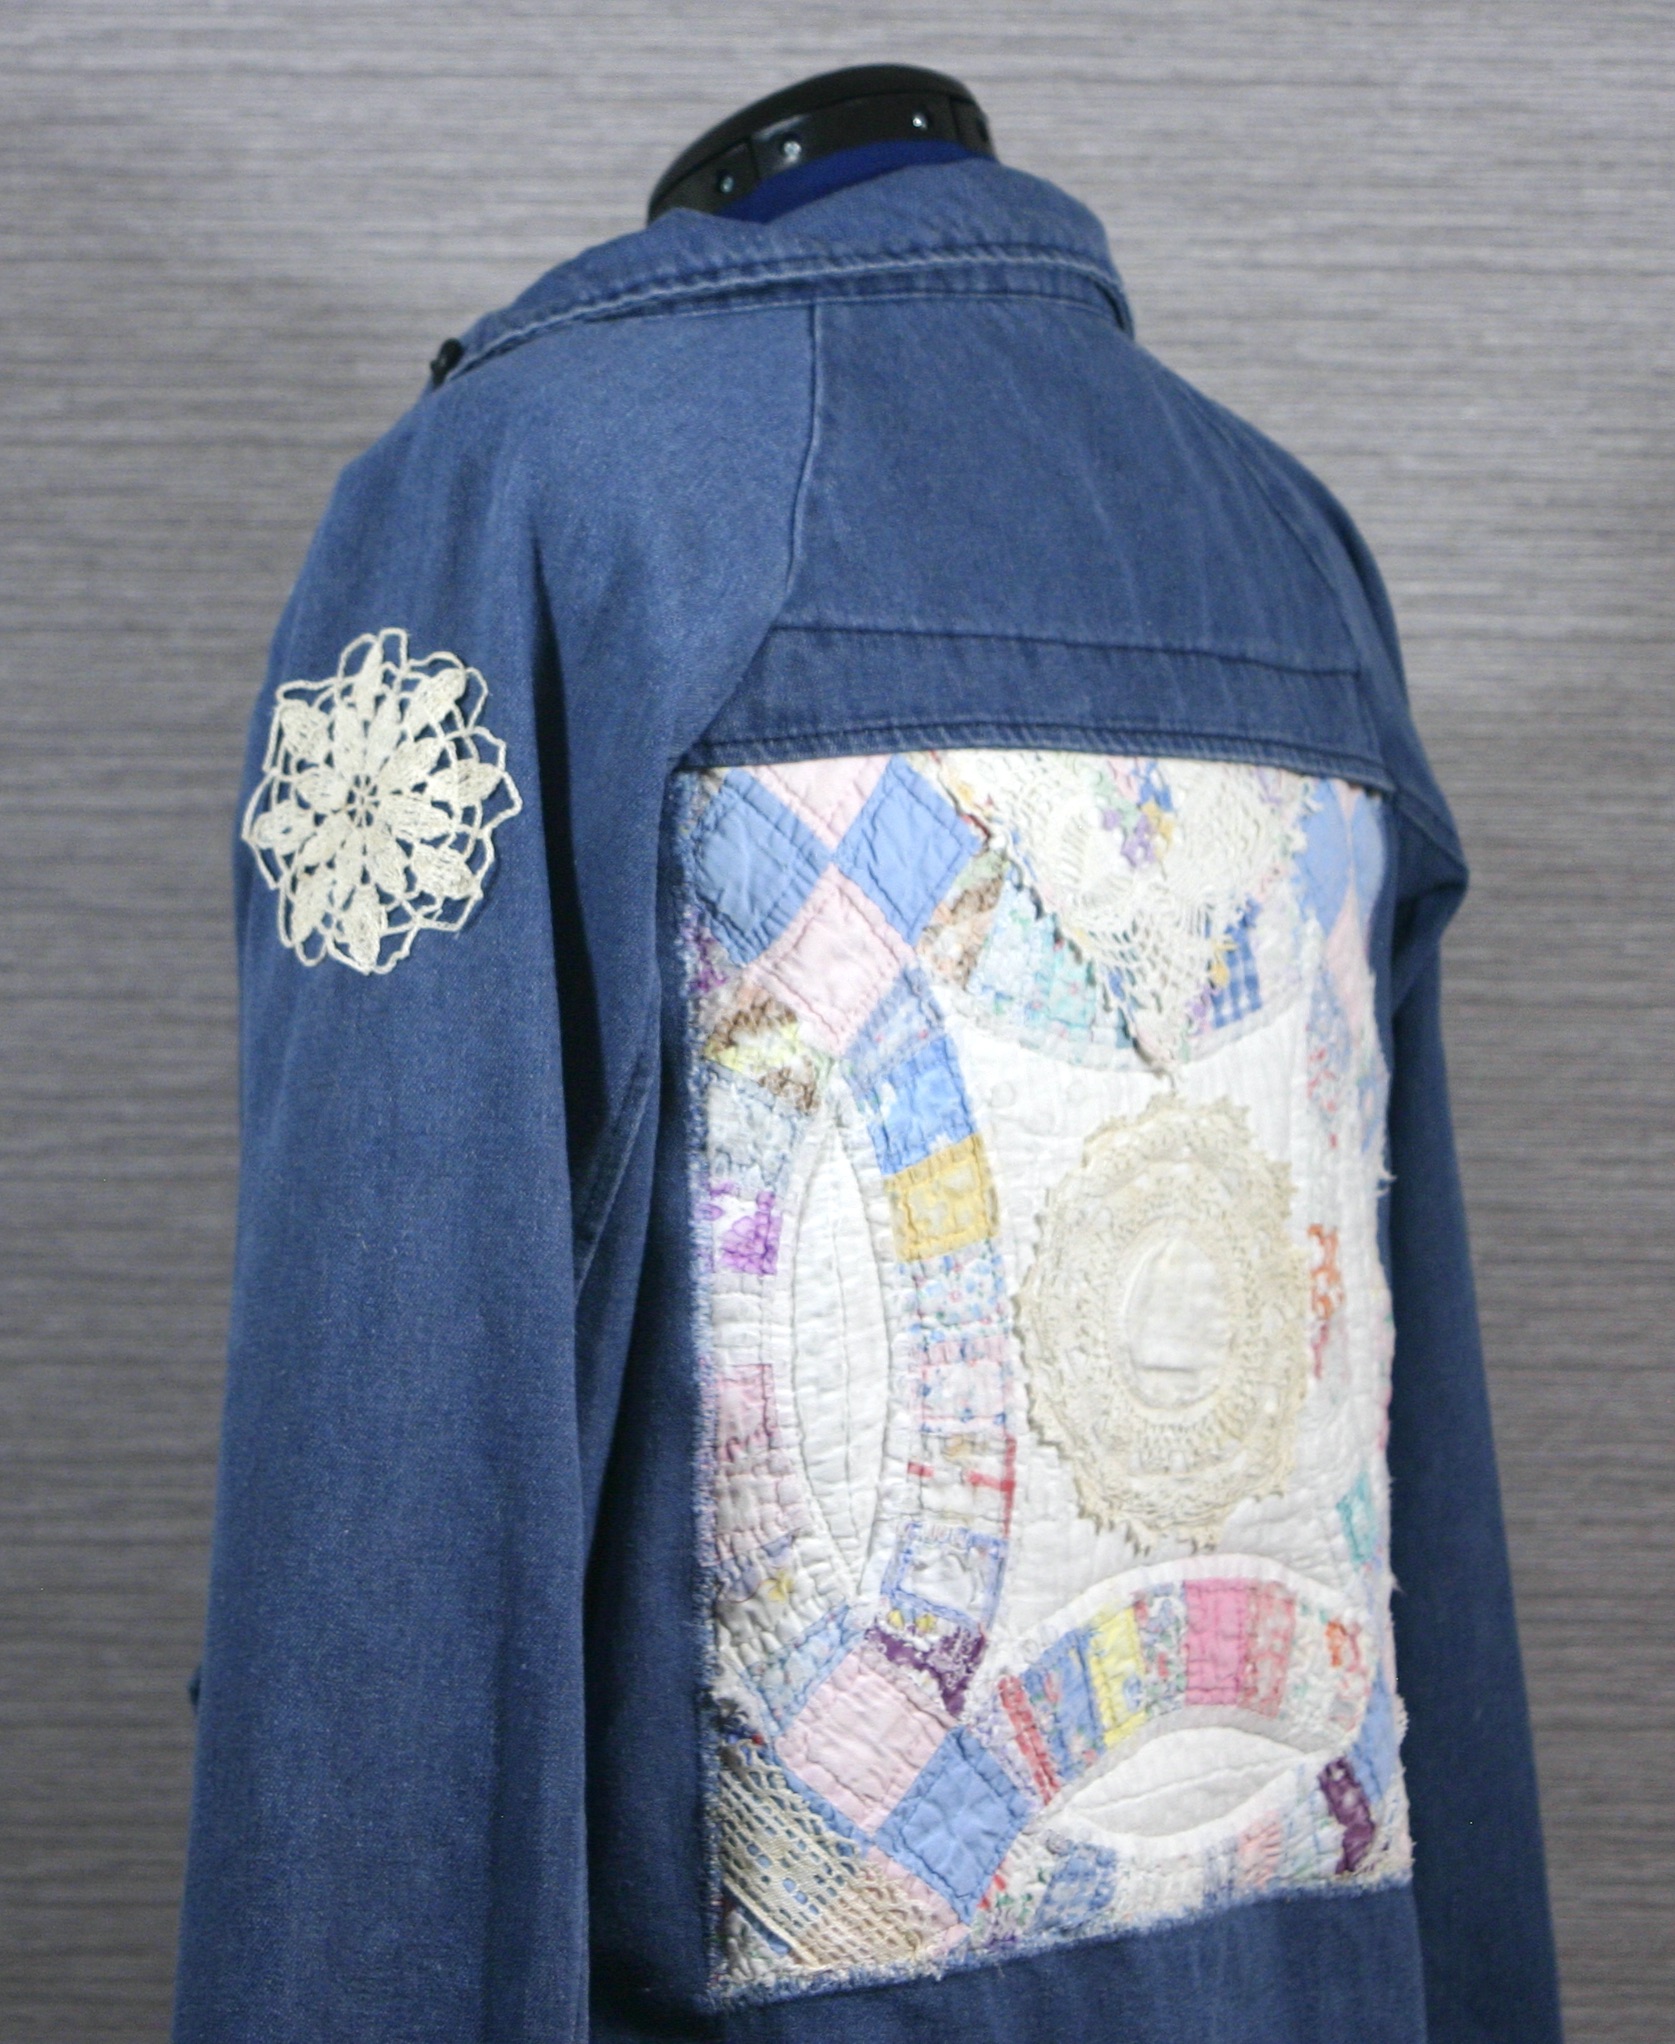 The back of a denim jacket with patchwork on it.